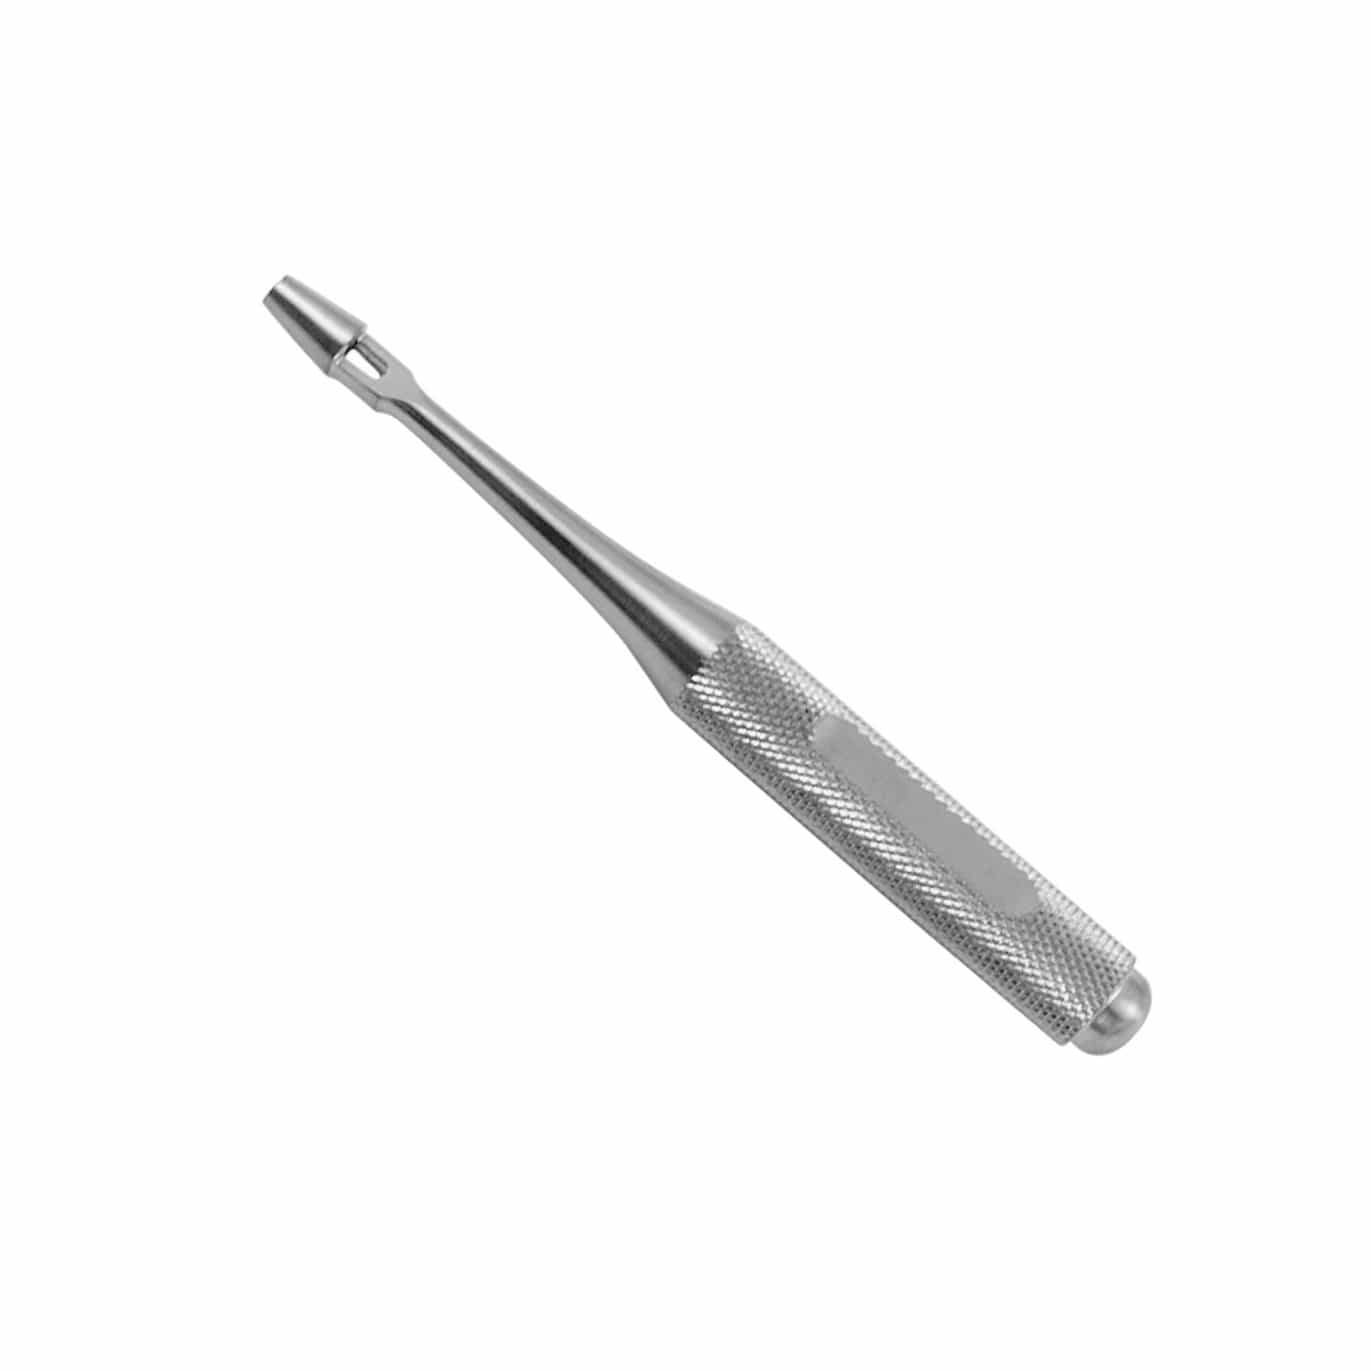 Armo Surgical Instruments 2mm Armo KEYES Skin Punch